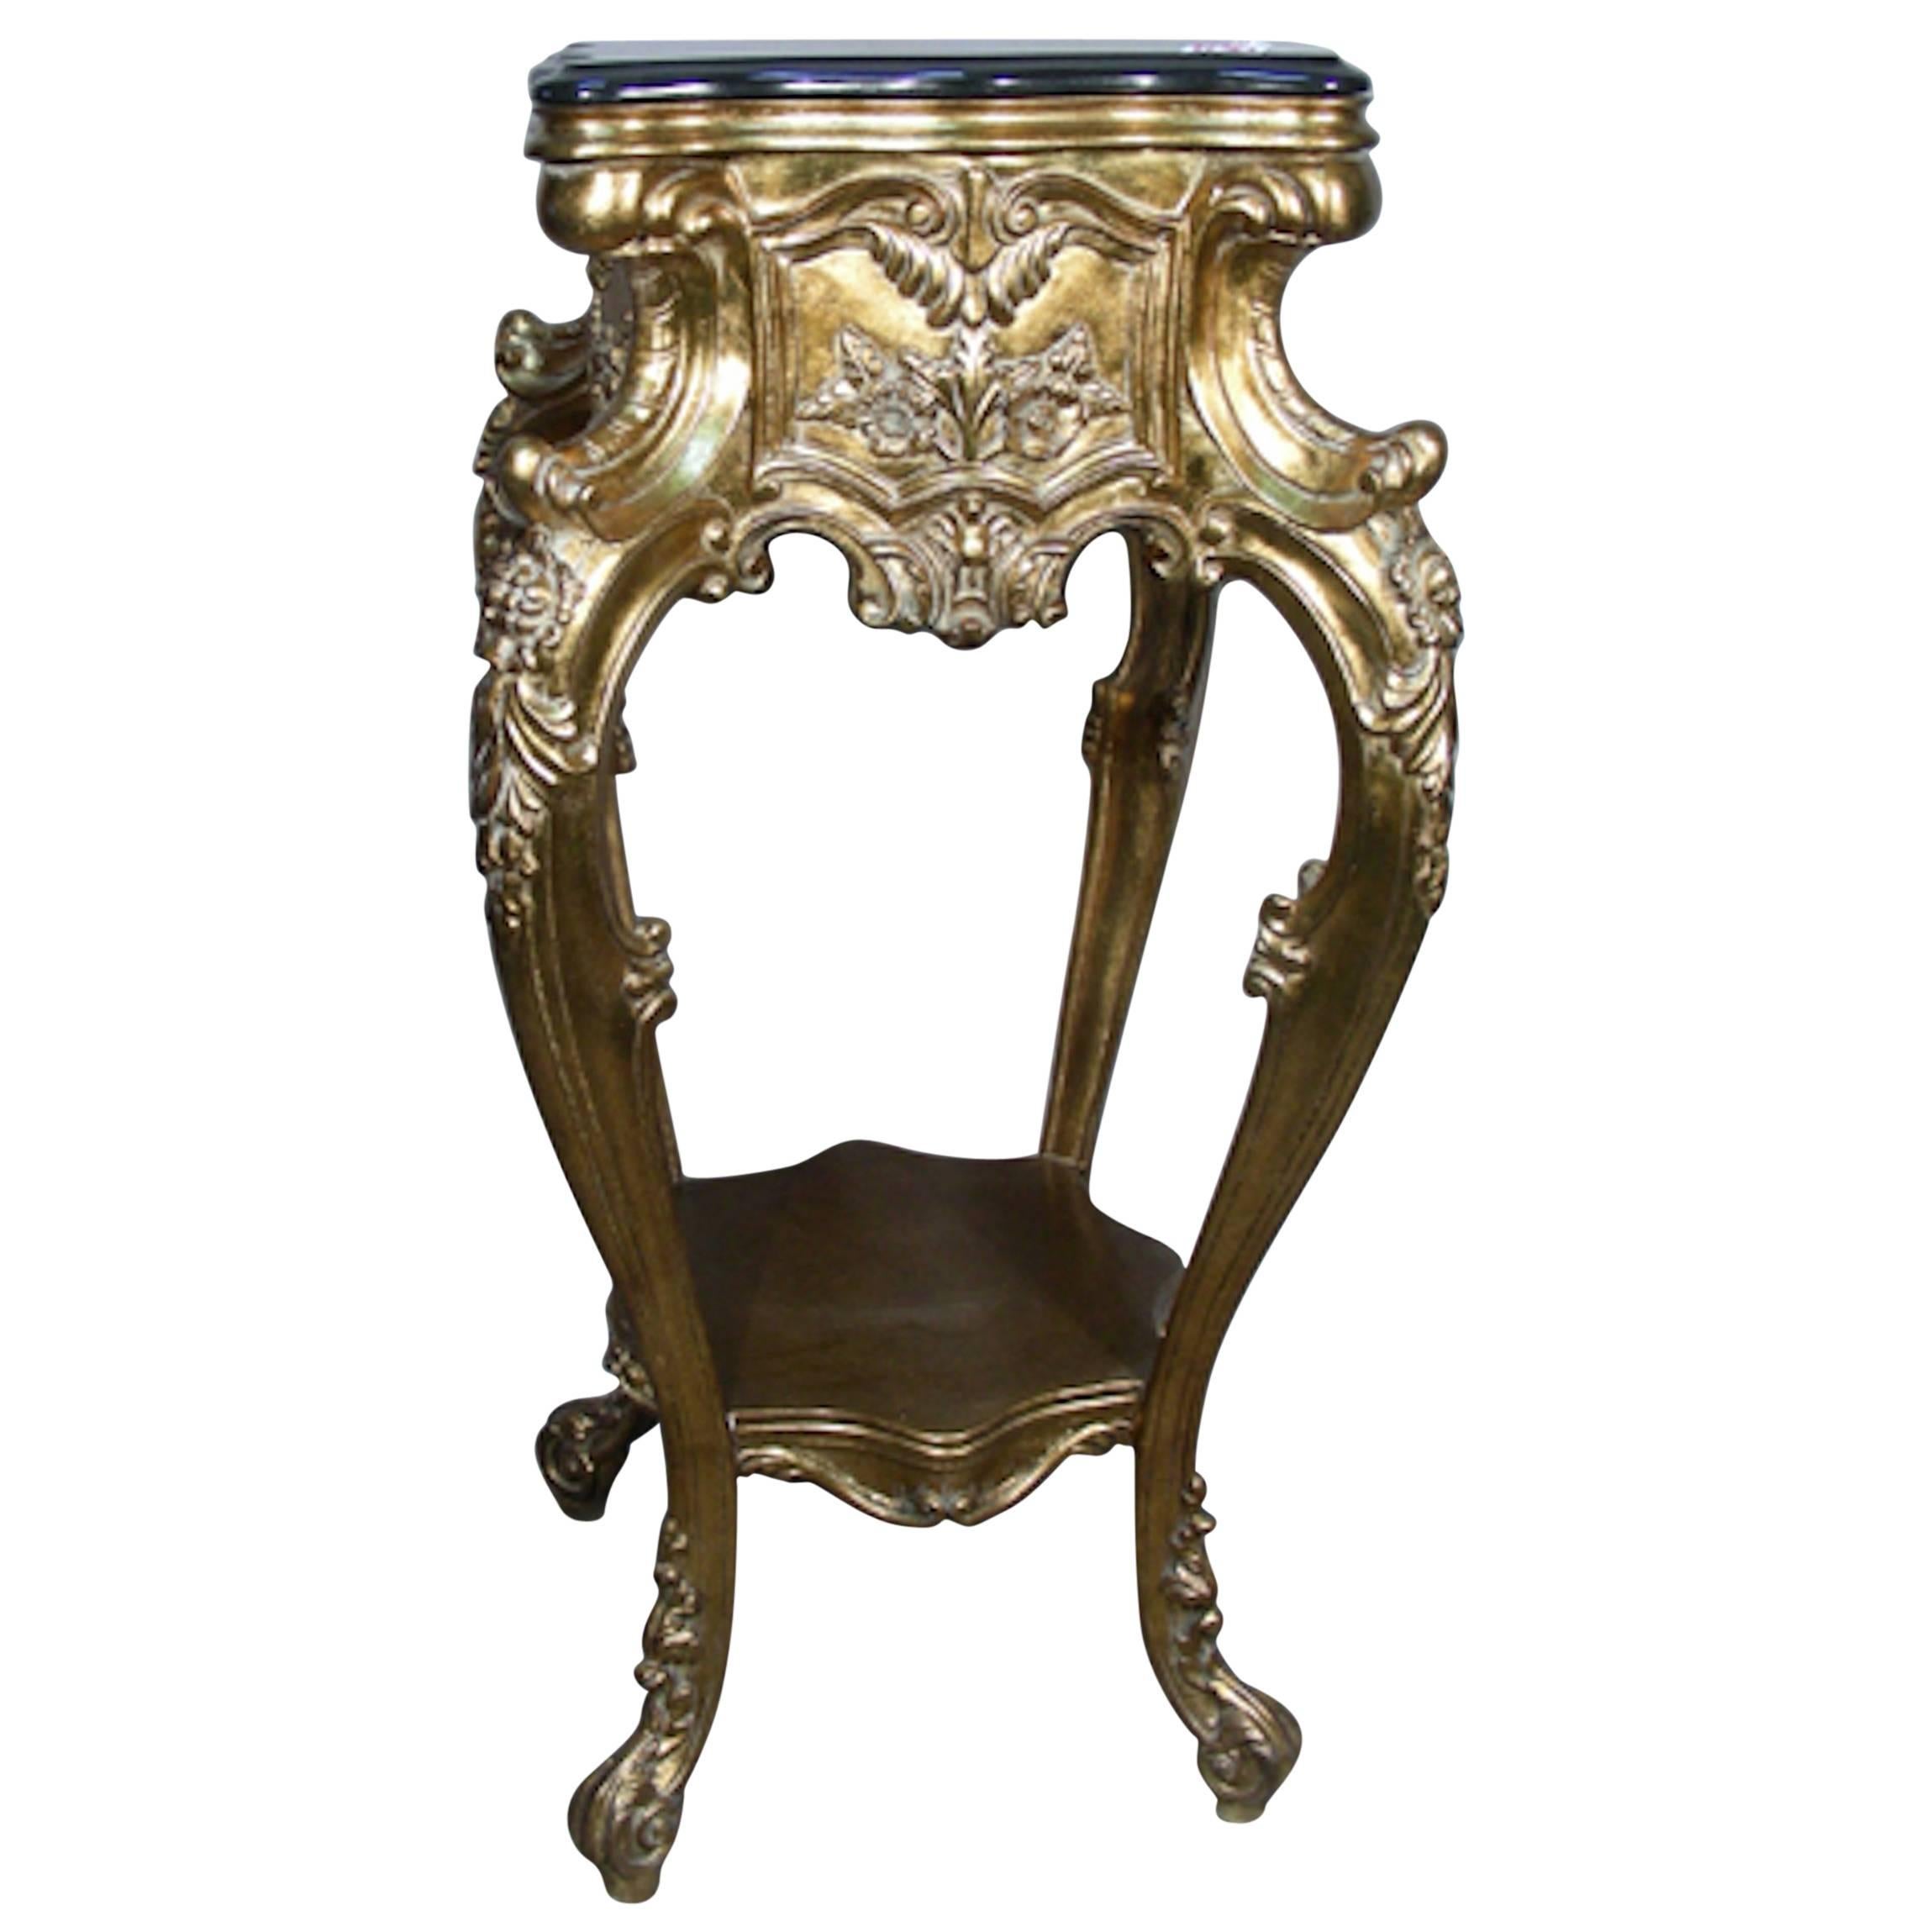 19th Century Carved Gilt Pedestal with Ornate Carving and Black Marble-Top For Sale